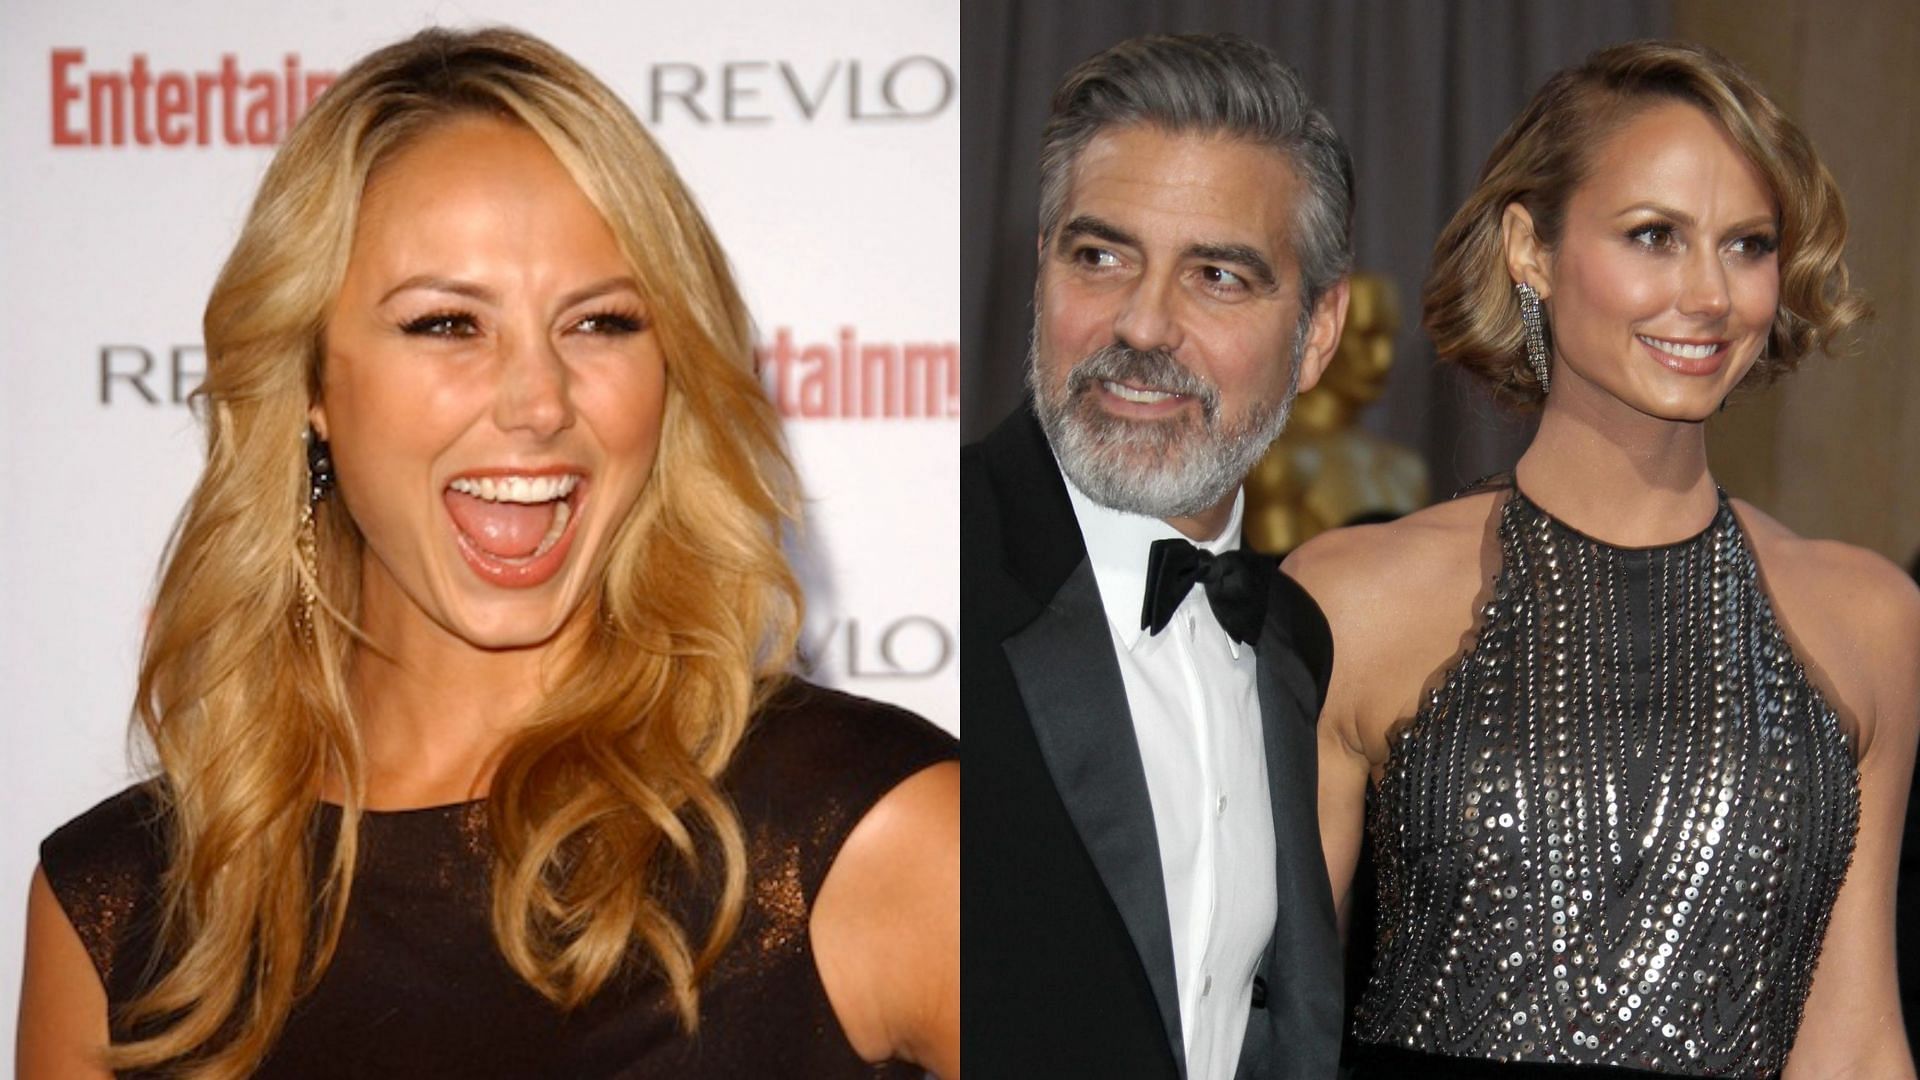 WWE legend Stacy Keibler dated Hollywood megastar George Clooney for two years